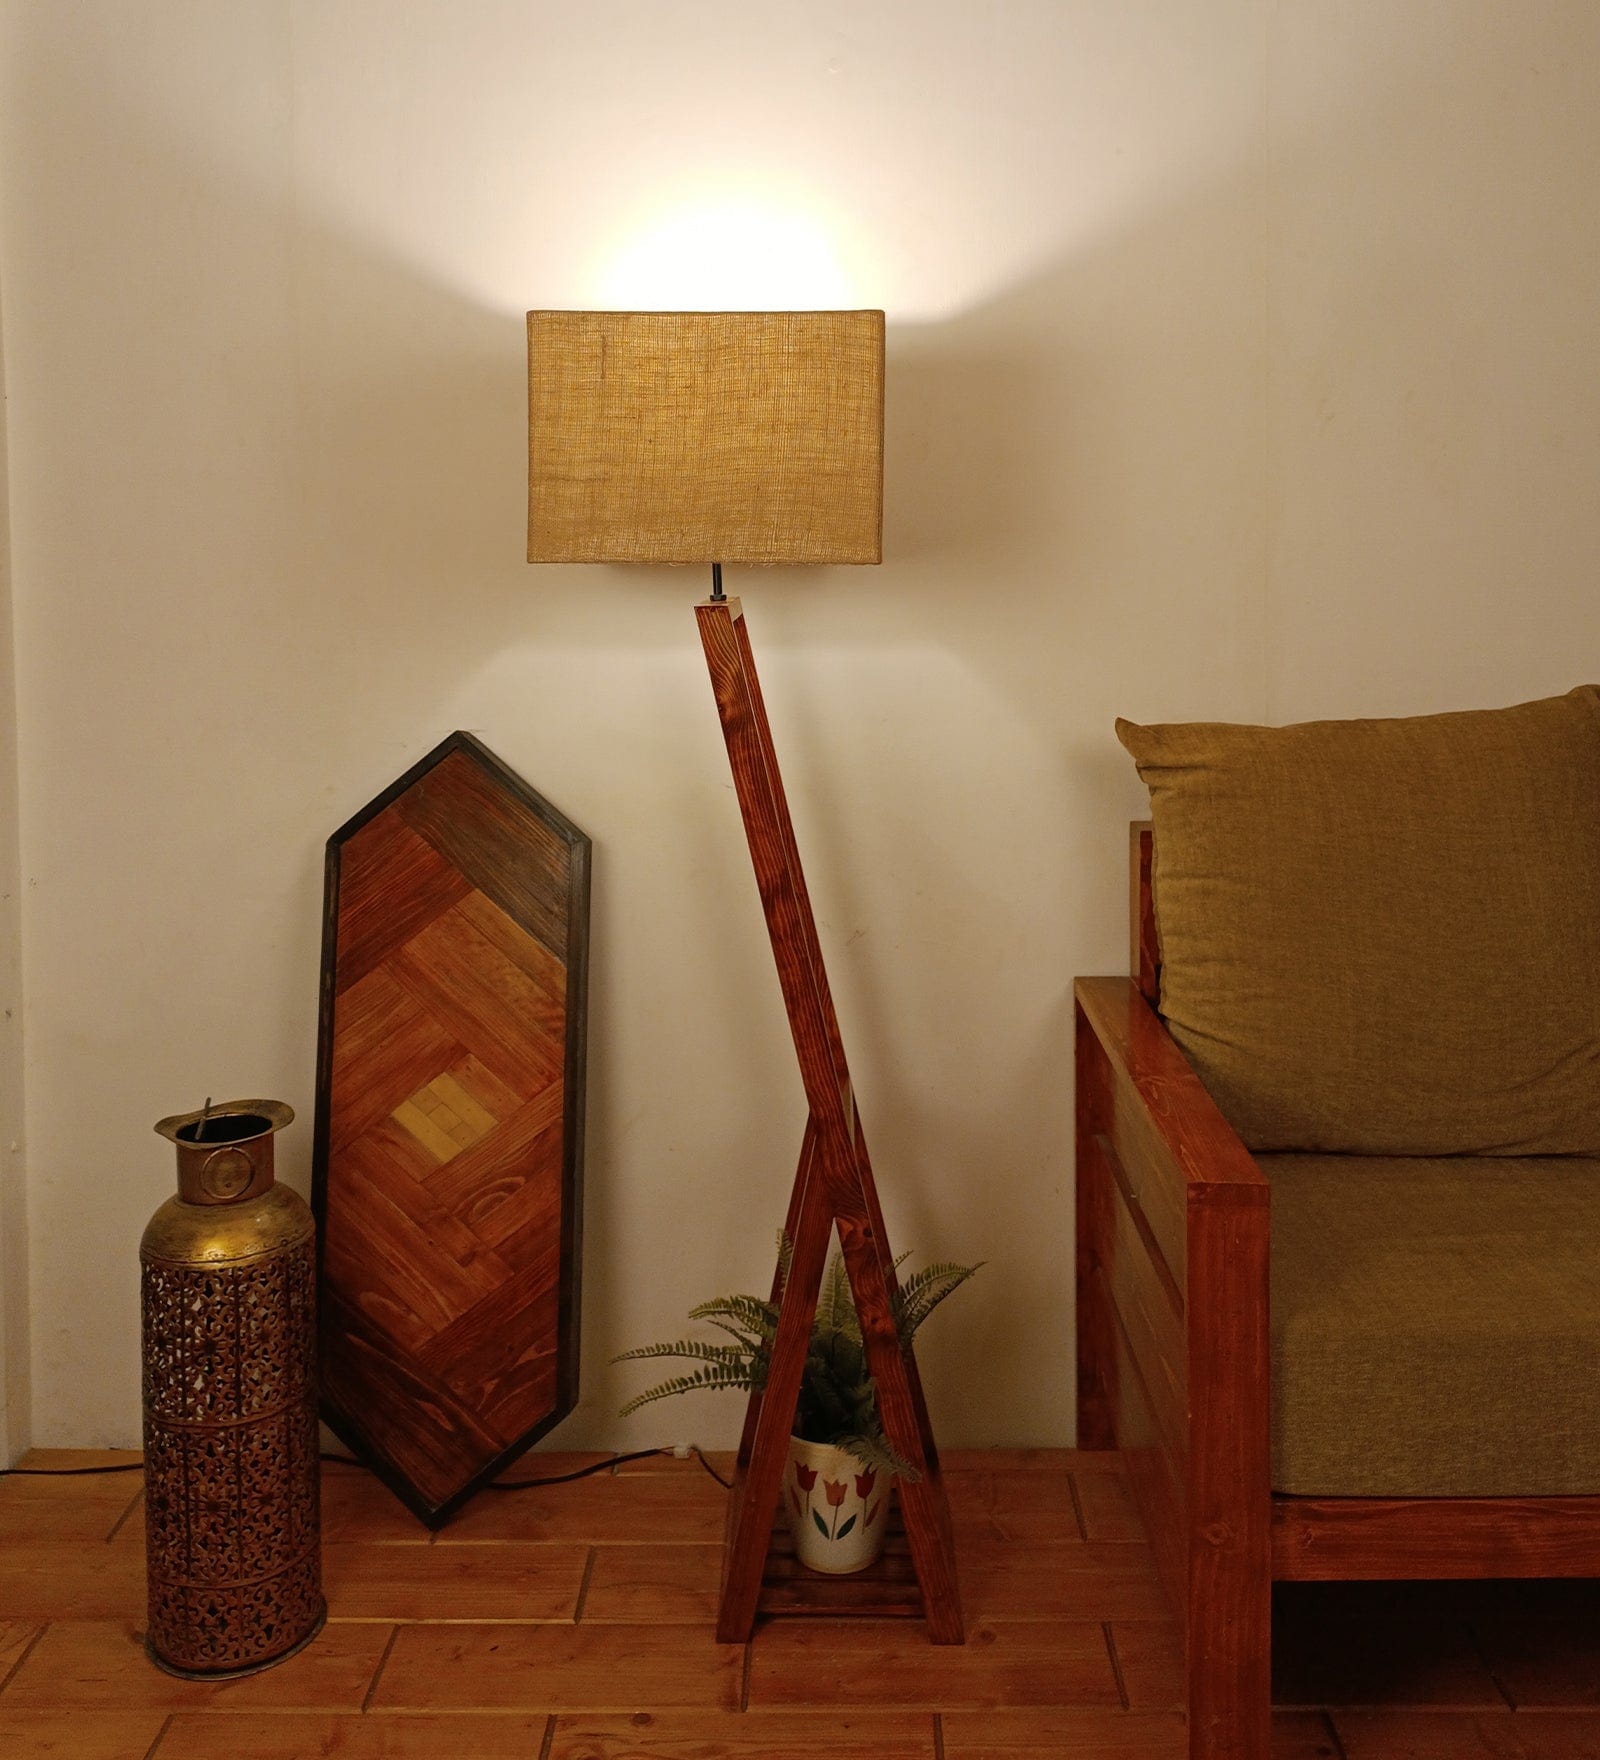 Bezalel Wooden Floor Lamp with Brown Base and Beige Fabric Lampshade (BULB NOT INCLUDED)